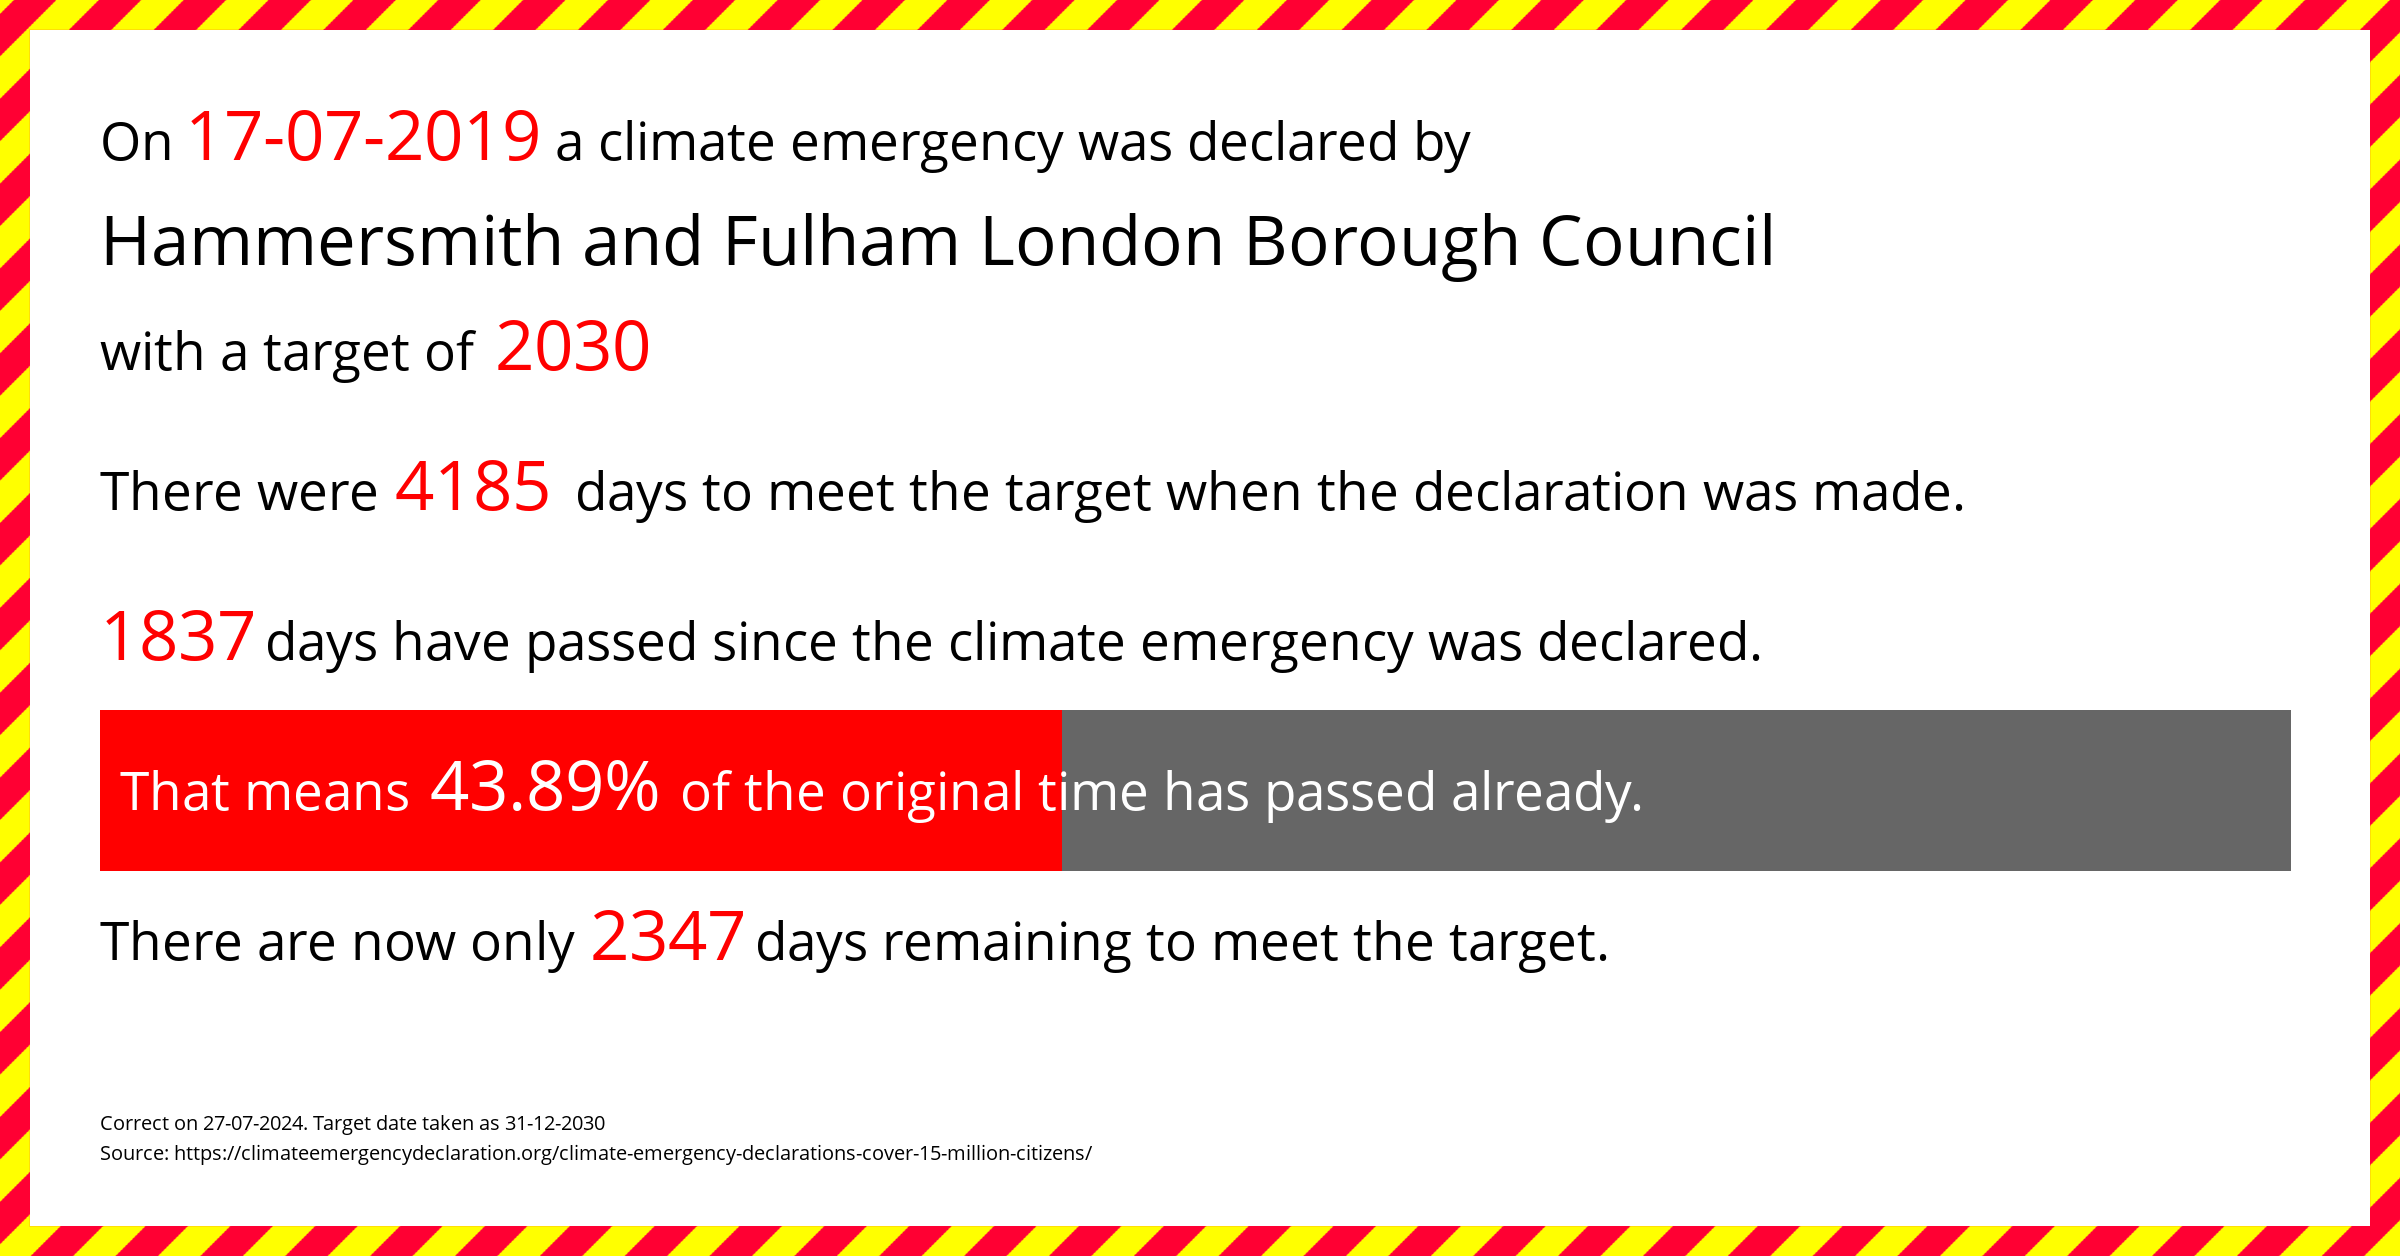 Hammersmith and Fulham London Borough Council declared a Climate emergency on Wednesday 17th July 2019, with a target of 2030.